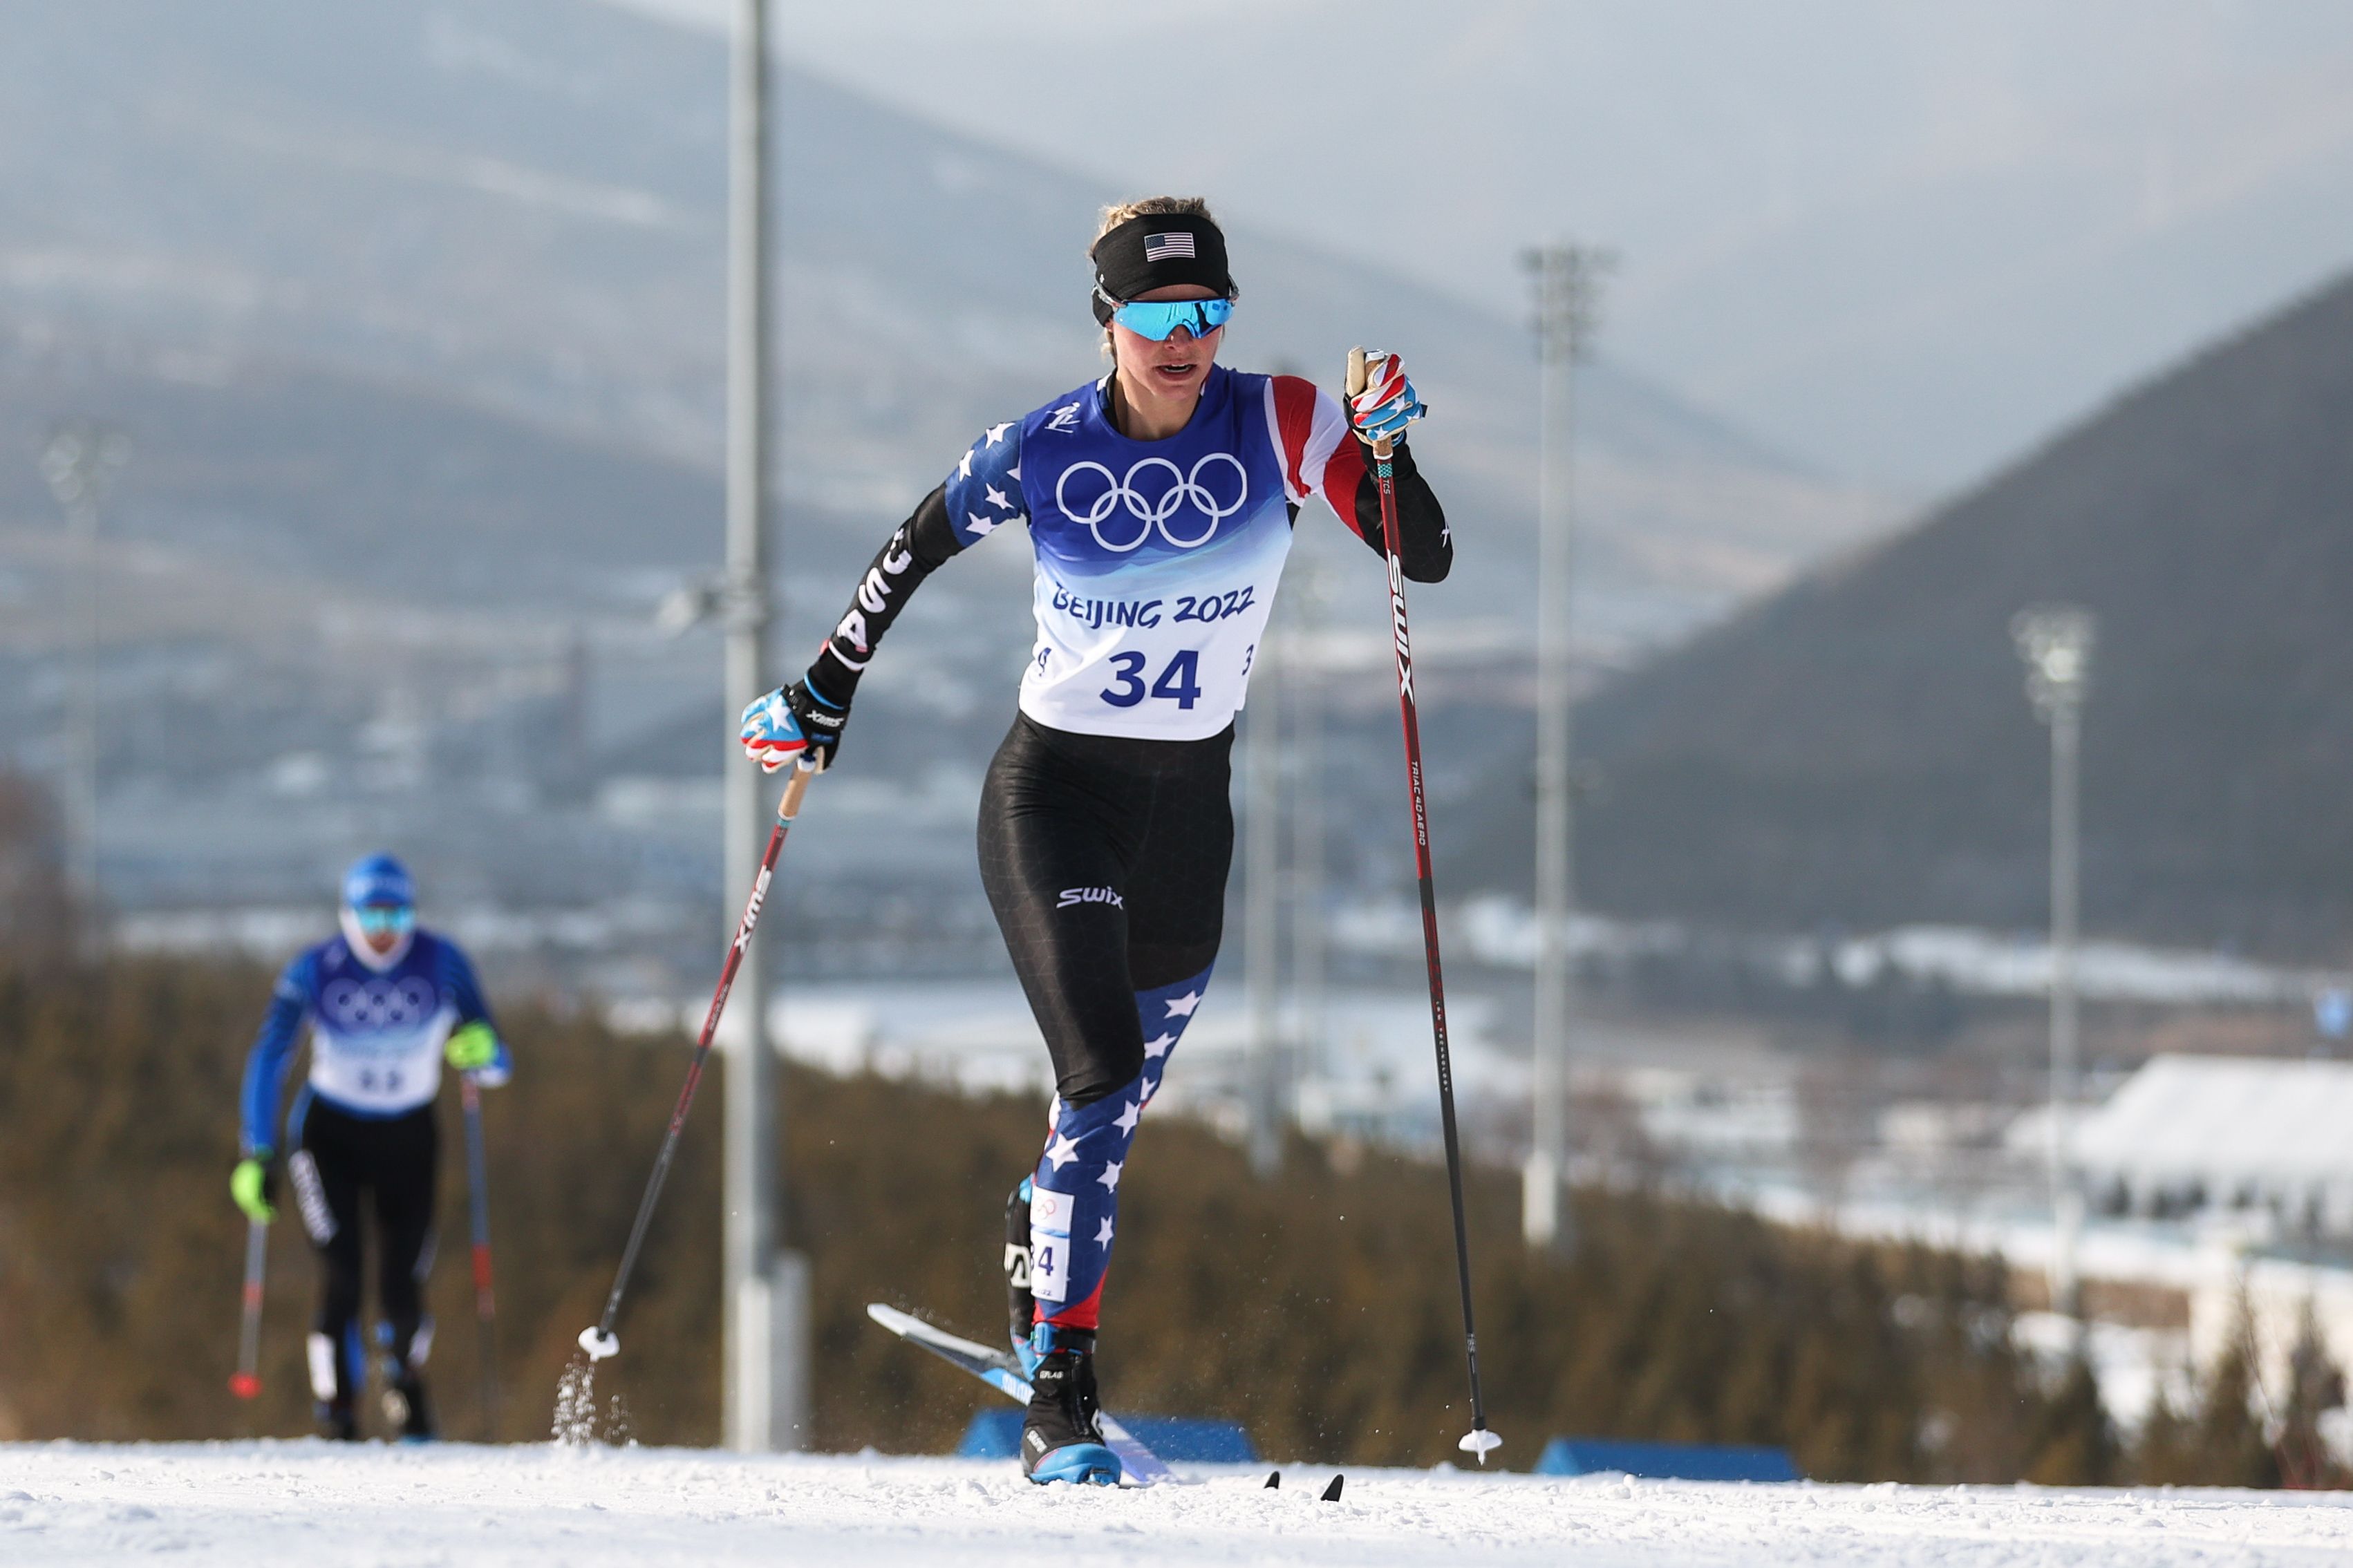  US Olympian Jessie Diggins competes in the women's 10km classical event at the National Cross-Country Skiing Center Feb. 10.